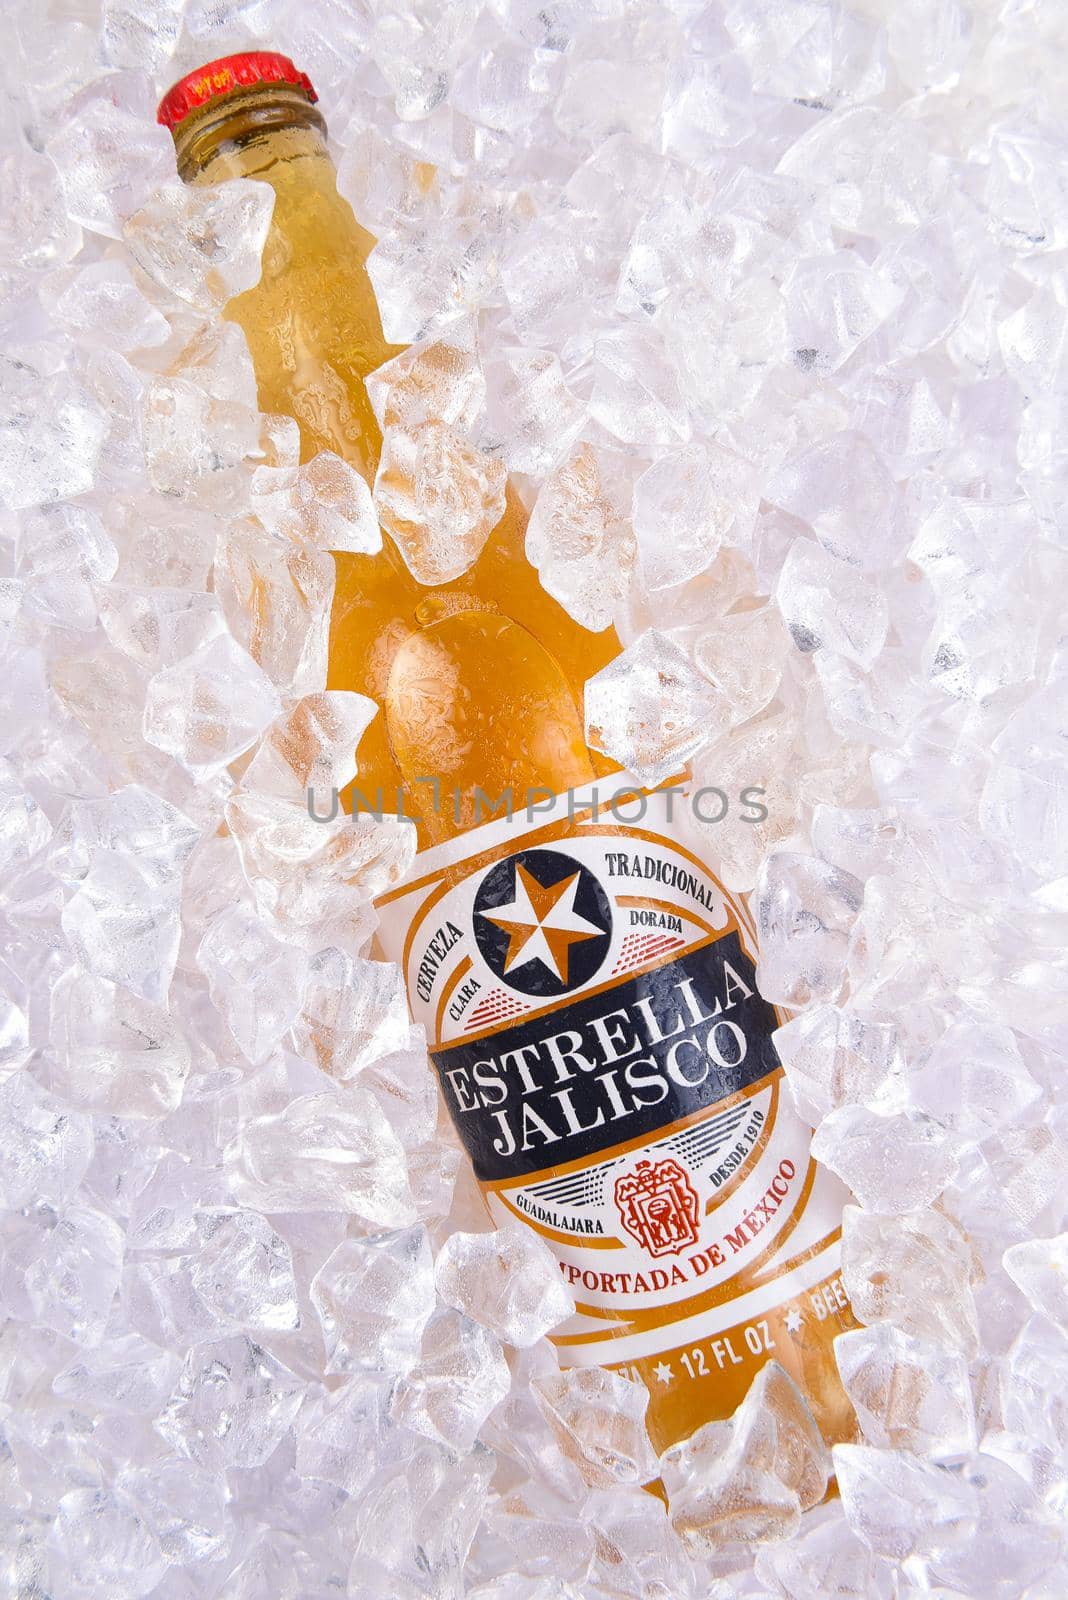 IRVINE, CALIFORNIA - MARCH 29, 2018: Closeup of a bottle of Estrella Jalisco beer in ice.  Estrella Jalisco is a American Lager style beer brewed by Grupo Modelo.